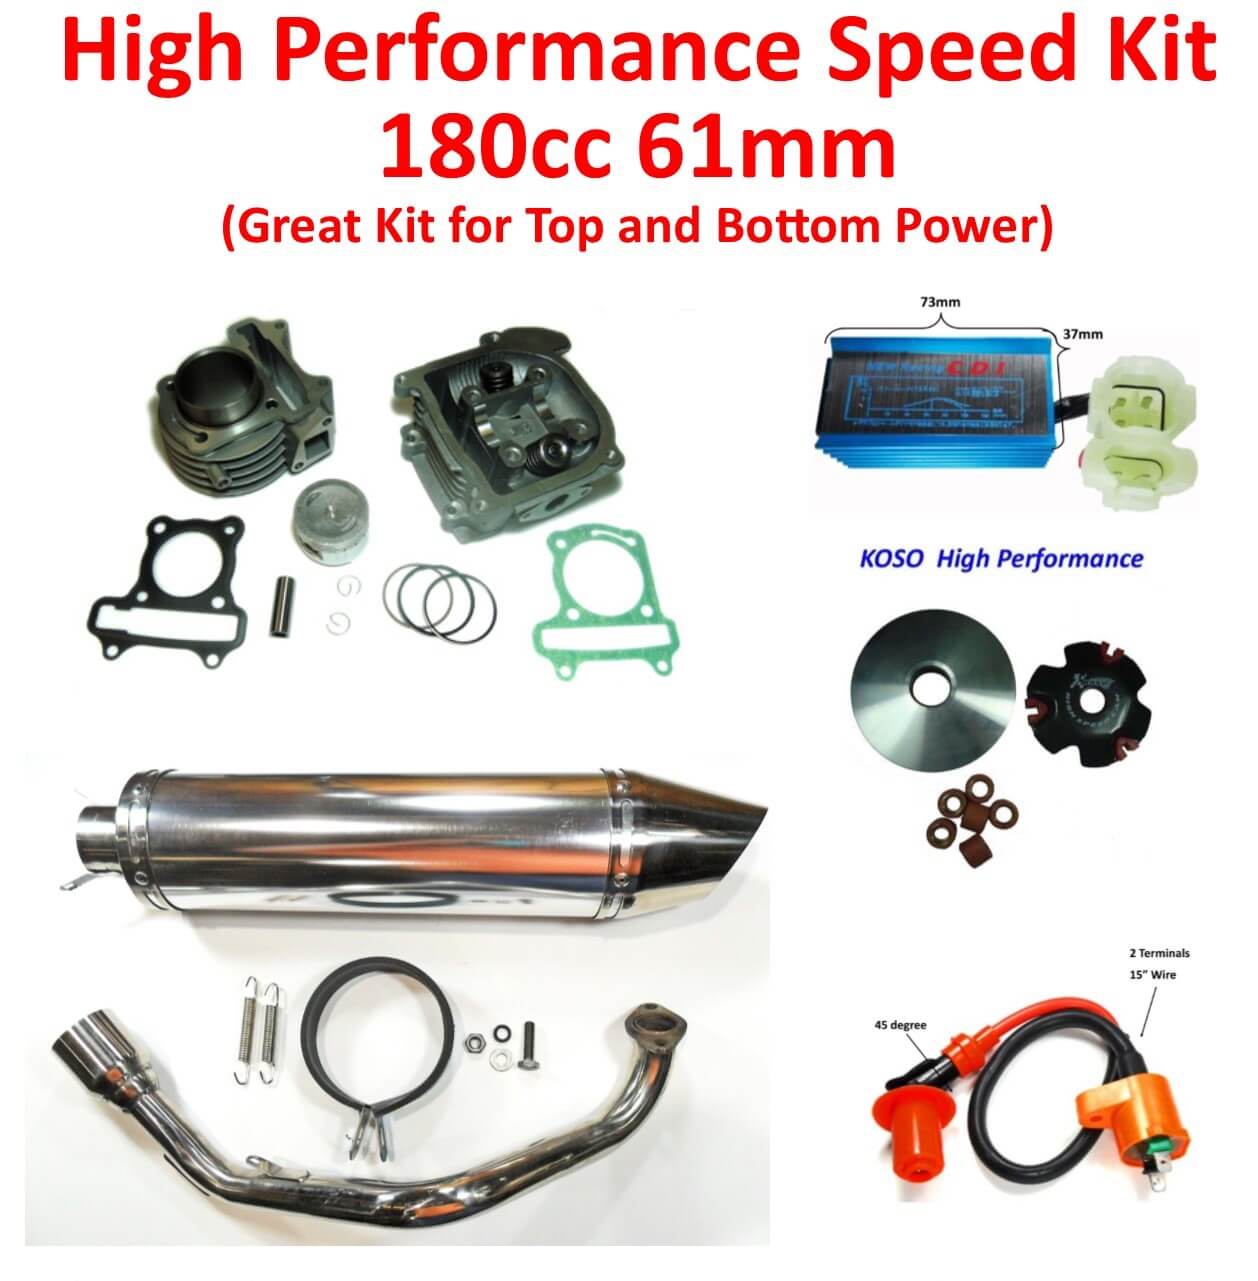 High Performance Speed Kit GY6-180cc (61mm) Comes with all parts shown.